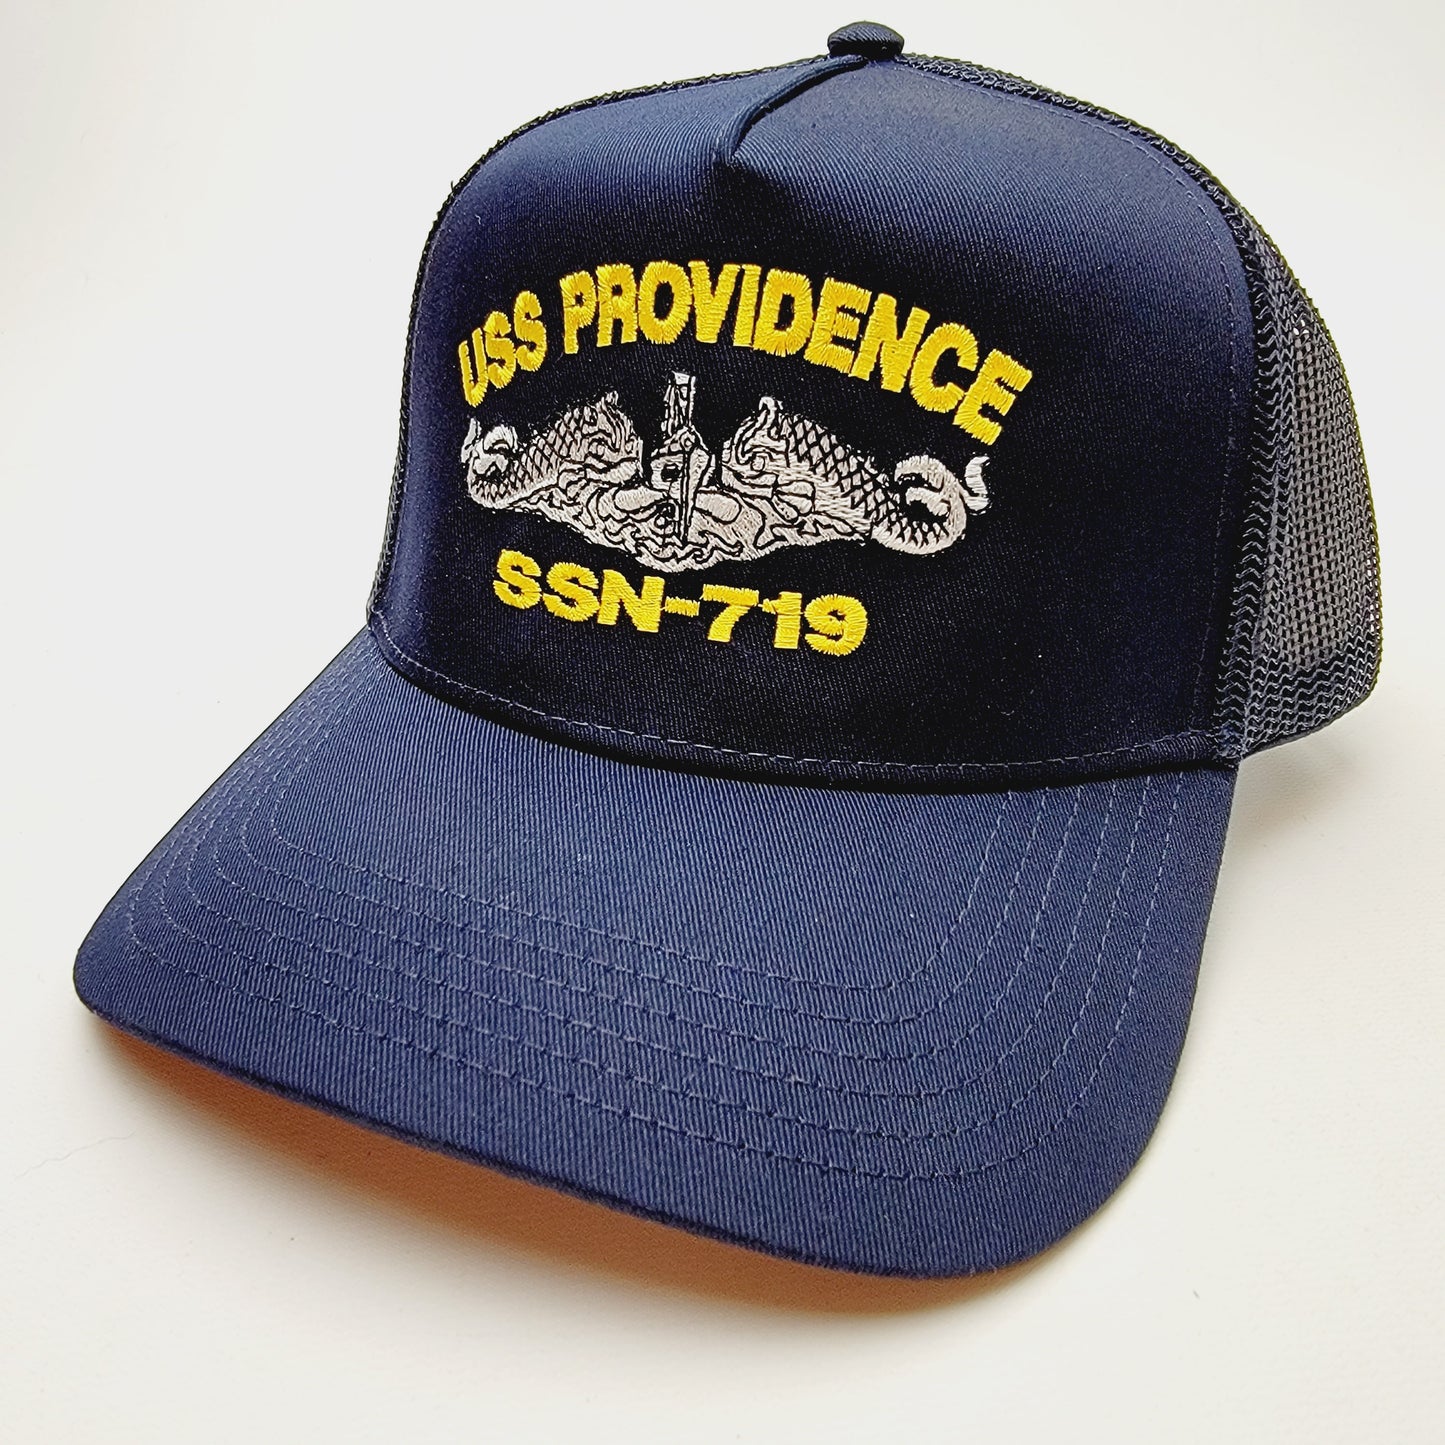 US NAVY USS PROVIDENCE SSN-719 Embroidered Hat Baseball Cap Adjustable Blue